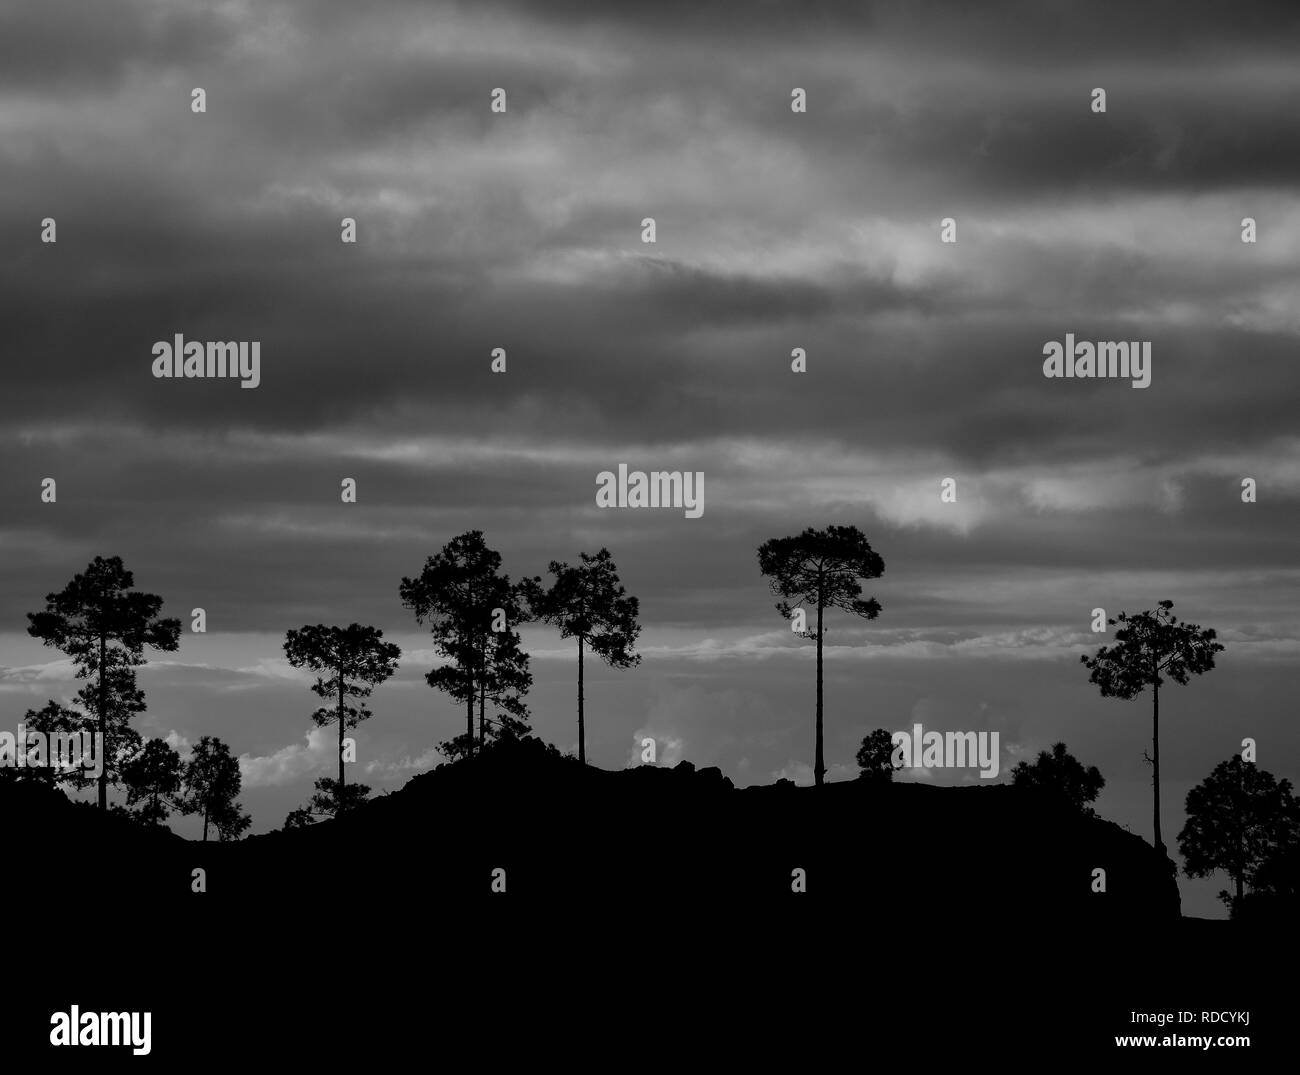 Silhouettes of pines and cloudy sky at dawn with monochrome effect, Pilancones, Gran Canaria Stock Photo